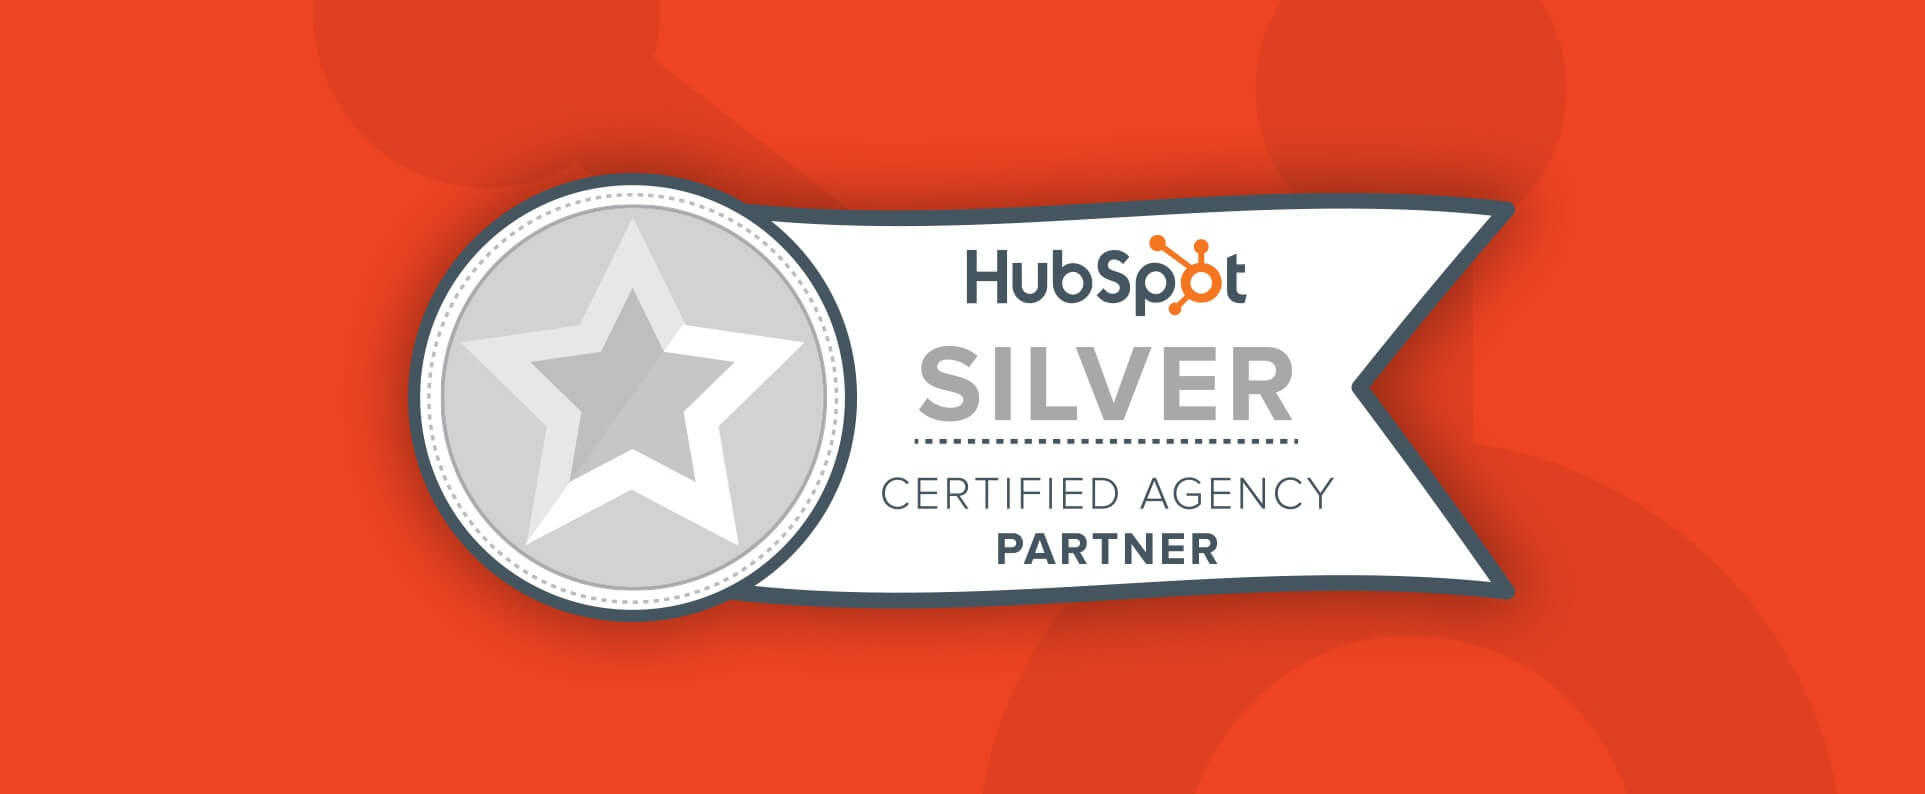 Curiosity Becomes a Silver HubSpot Certified Agency Partner